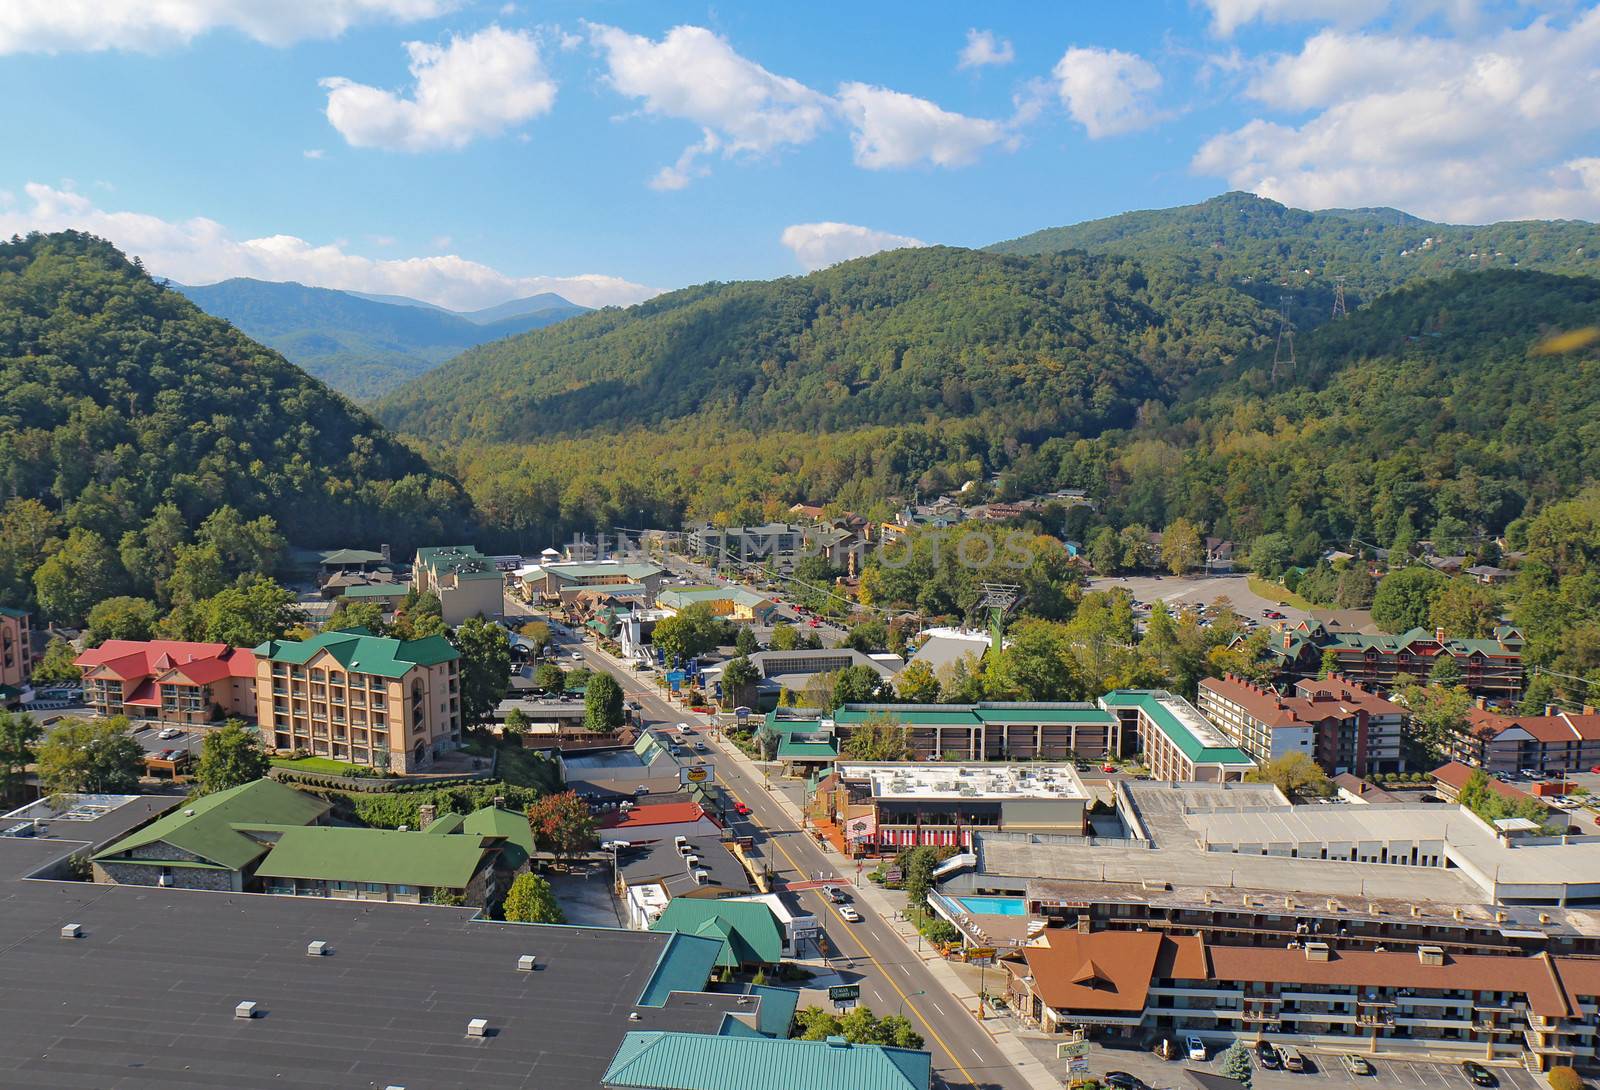 Aerial view of the main road through Gatlinburg, Tennessee by sgoodwin4813